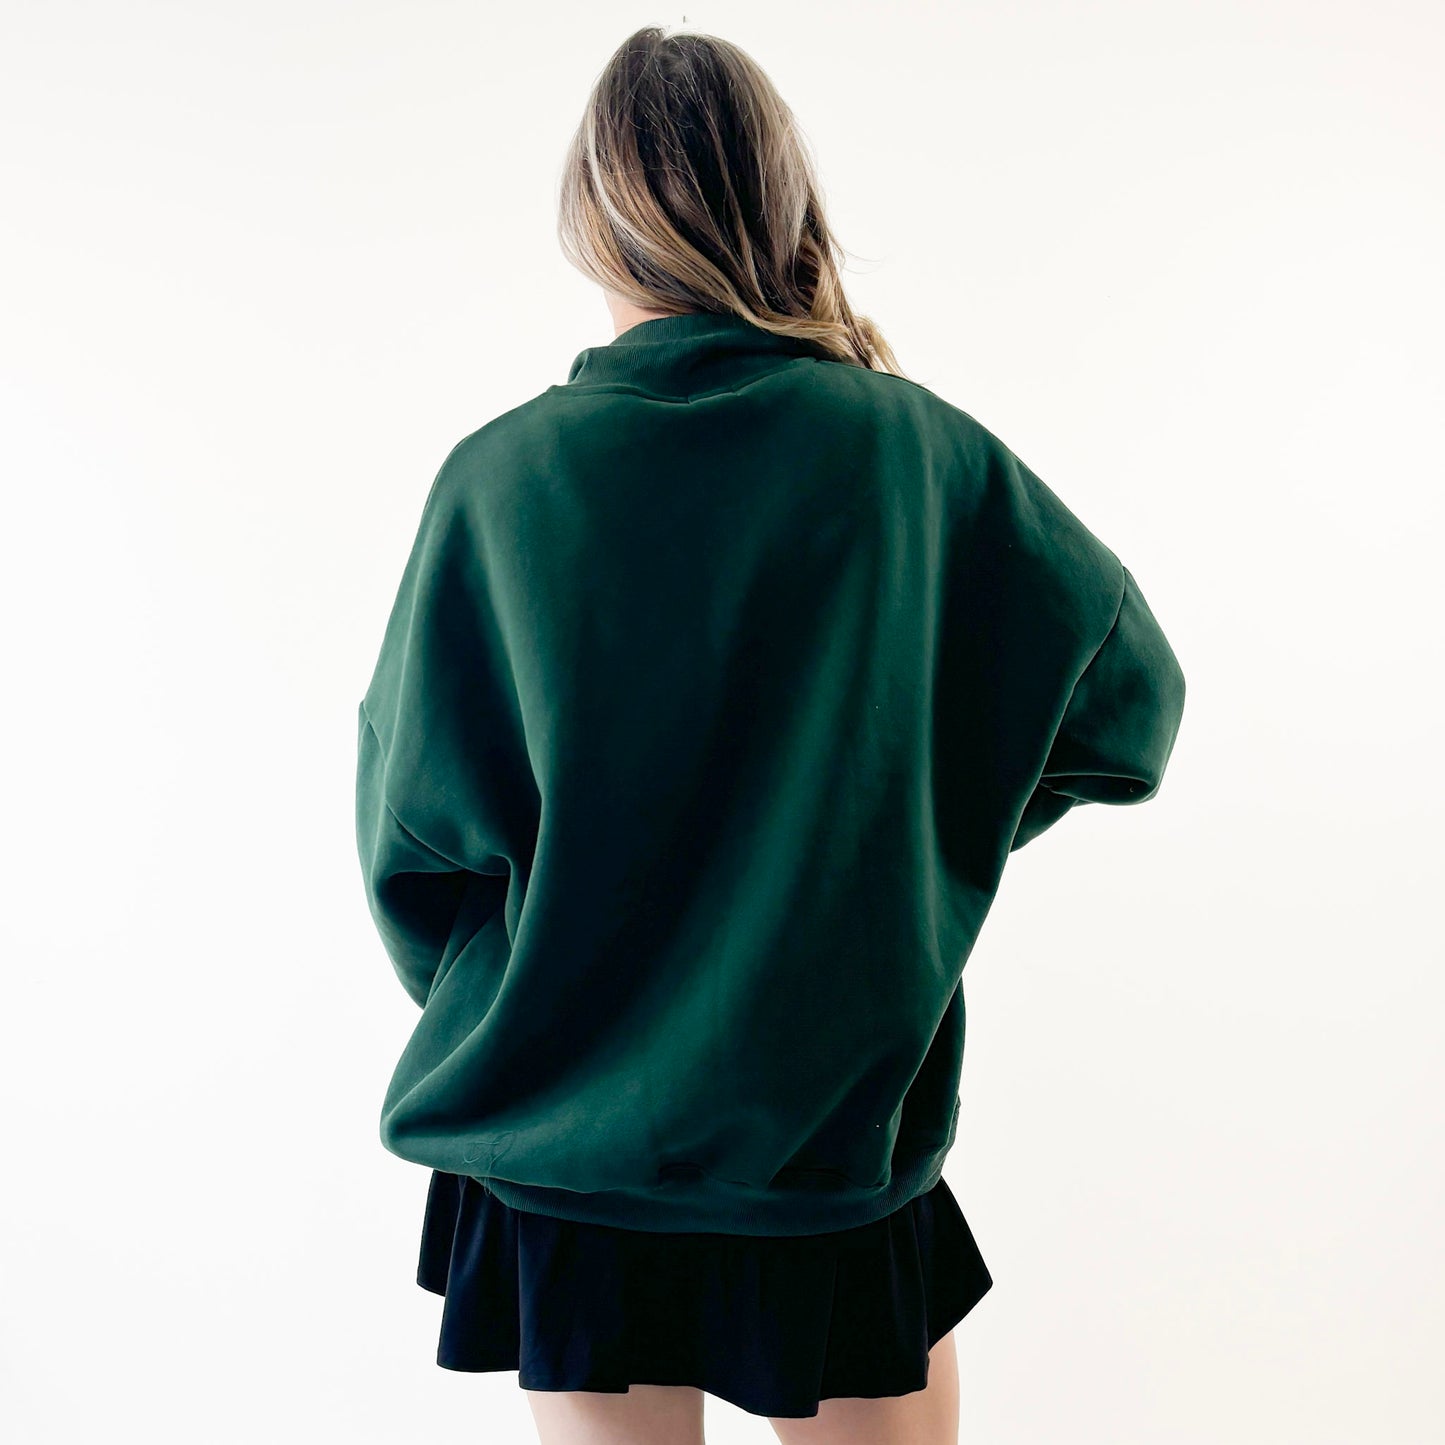 Heather oatmeal oversized collared sweatshirt with après pckl pickleball paddle embroidery